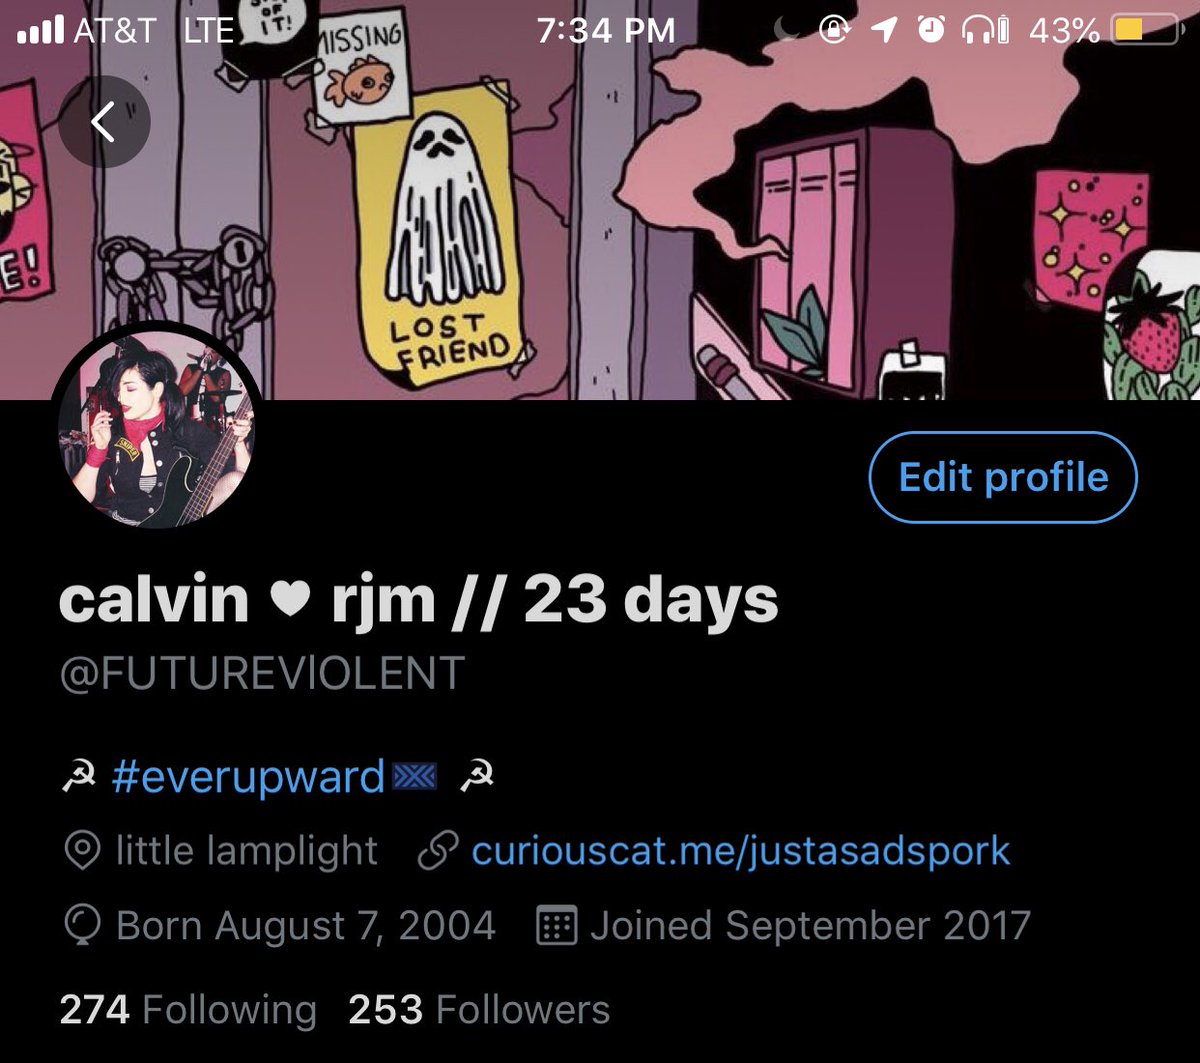 i fuck with this layout